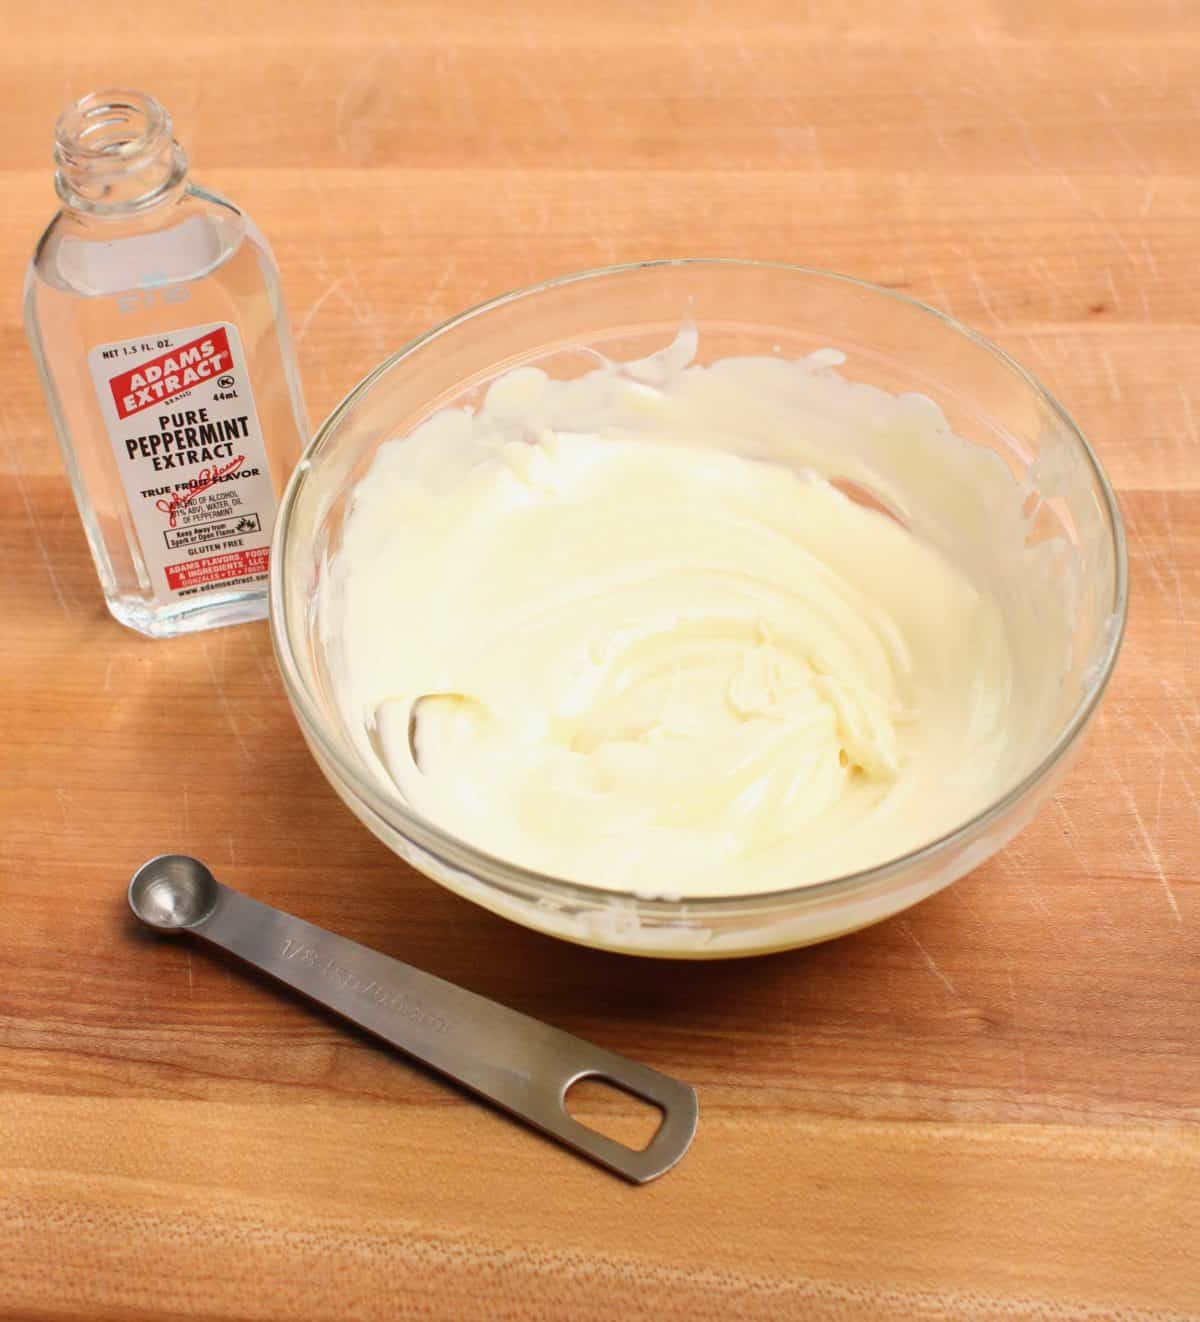 a bowl of white chocolate and a jar of peppermint extract on a brown table.